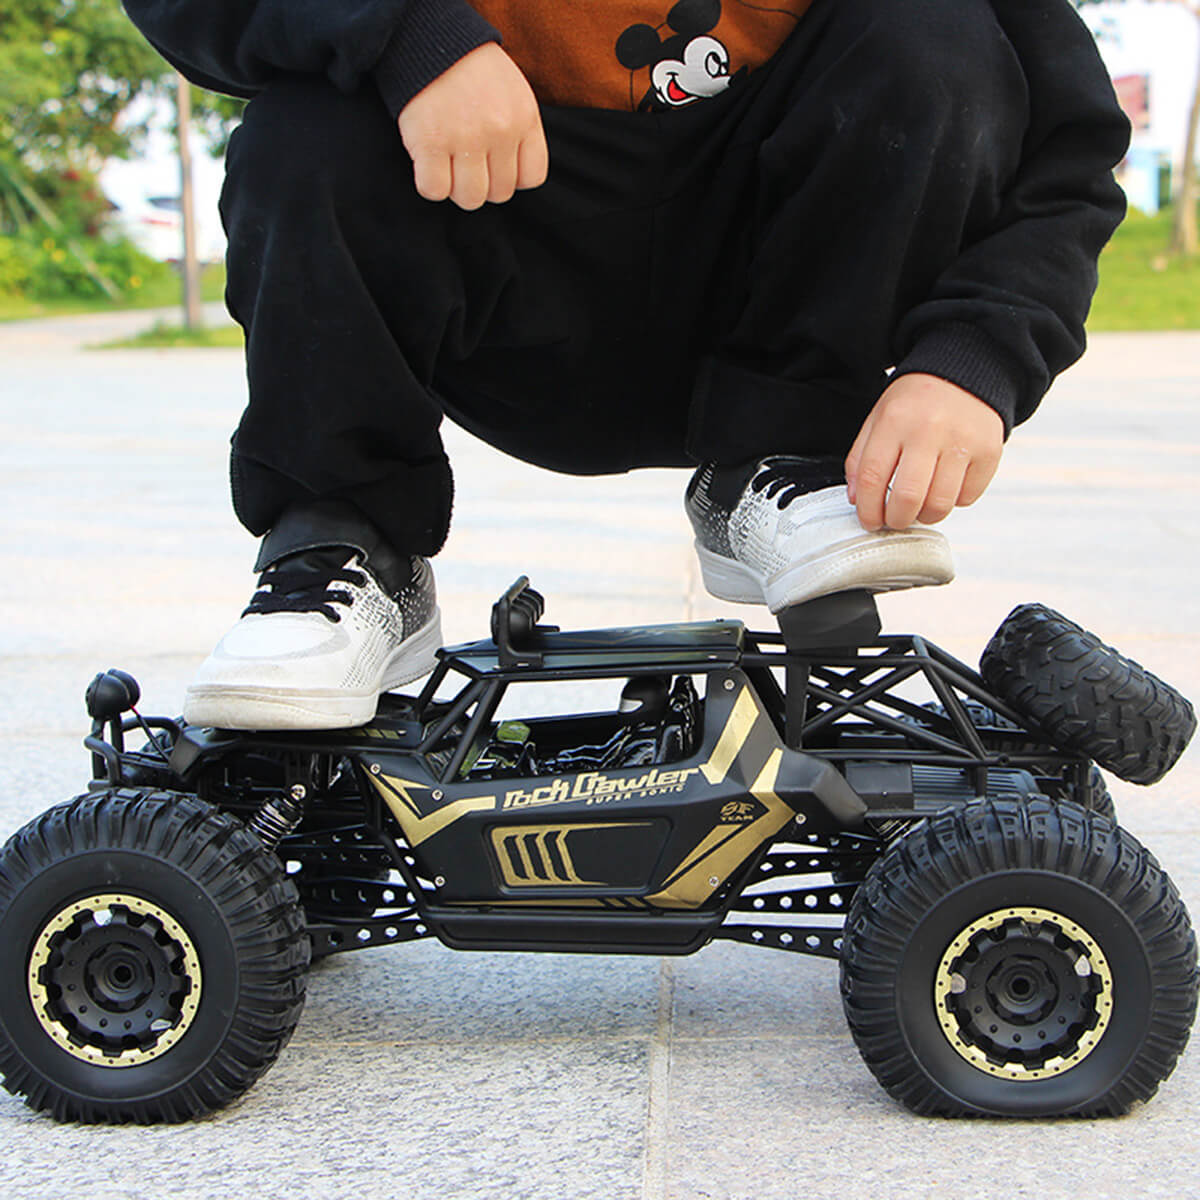 1/8 Large RC Car 4WD Remote Control Monster Truck Rock Crawler Climbing Buggy